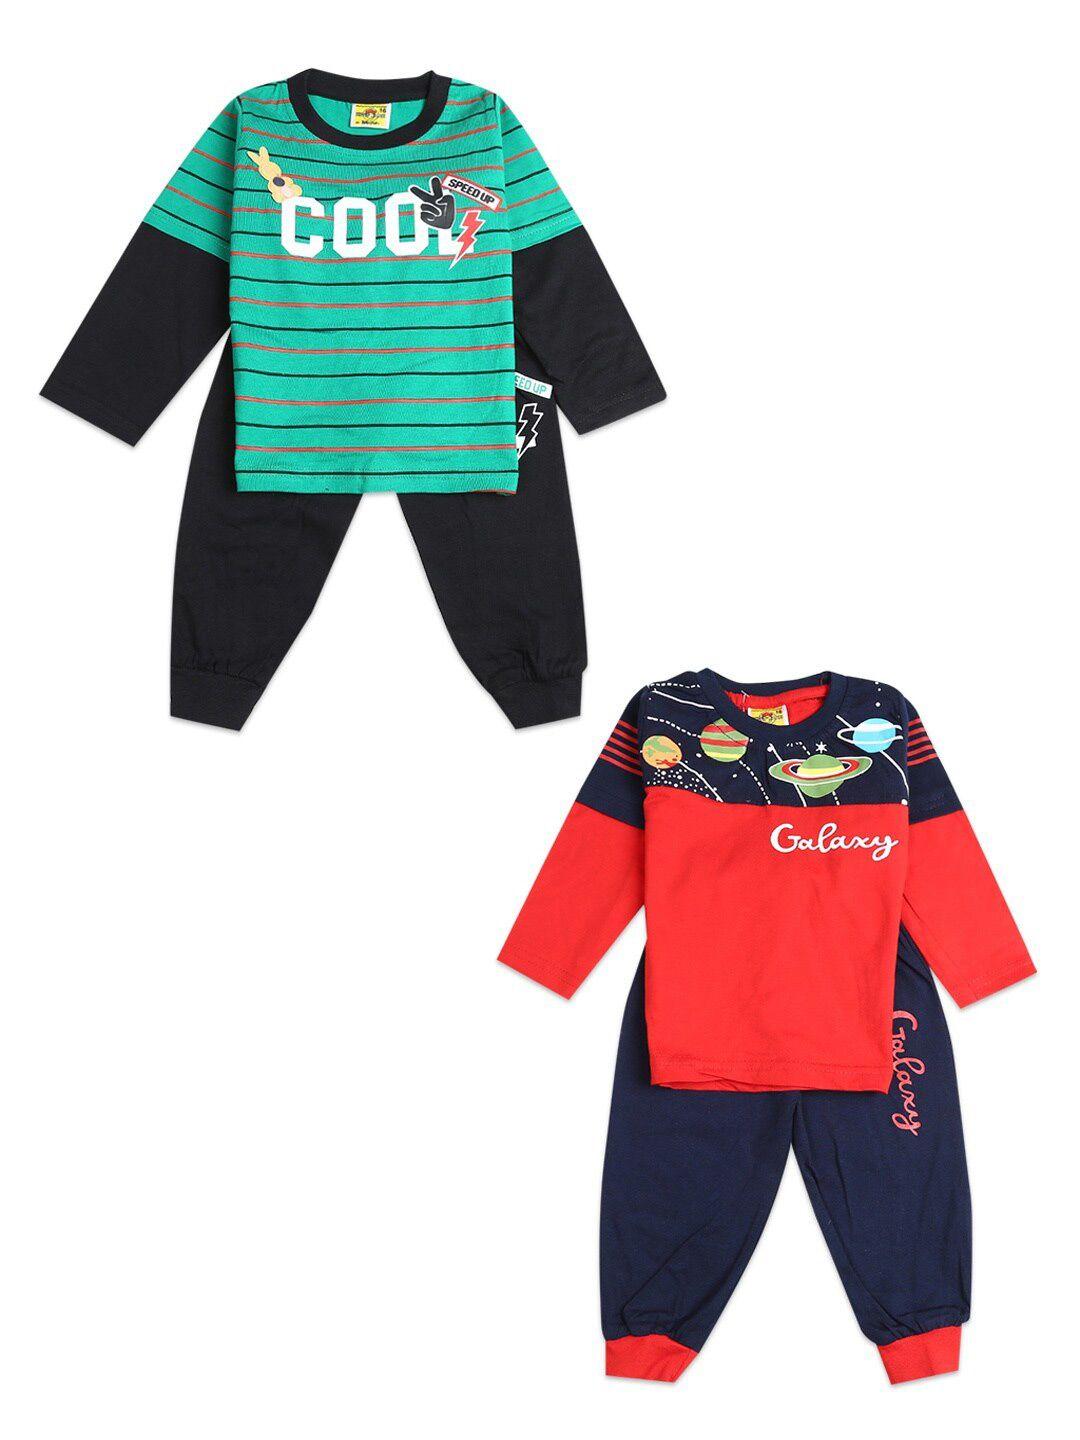 v-mart unisex kids green & red printed t-shirt with trousers